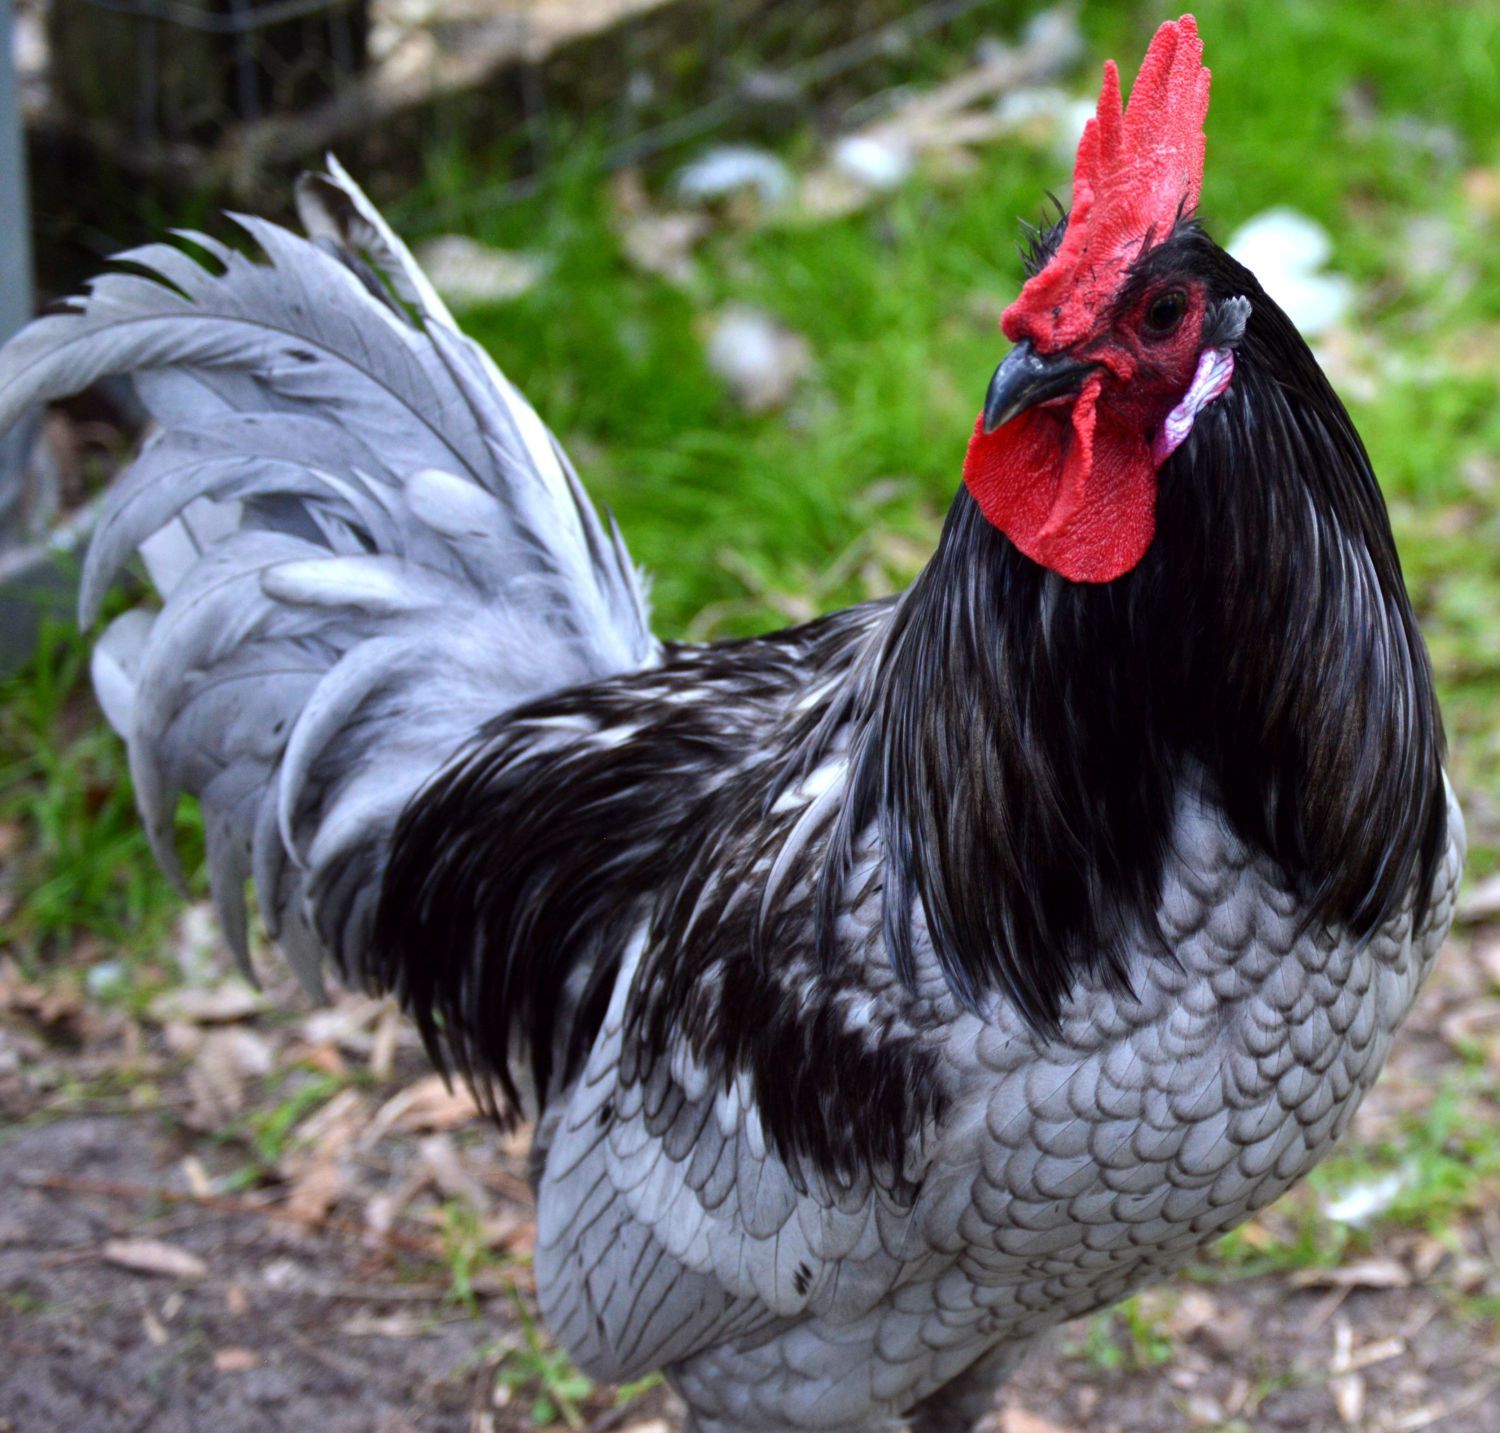 I Have One Blue Andalusian Rooster For Sale Backyard Chickens Learn How To Raise Chickens